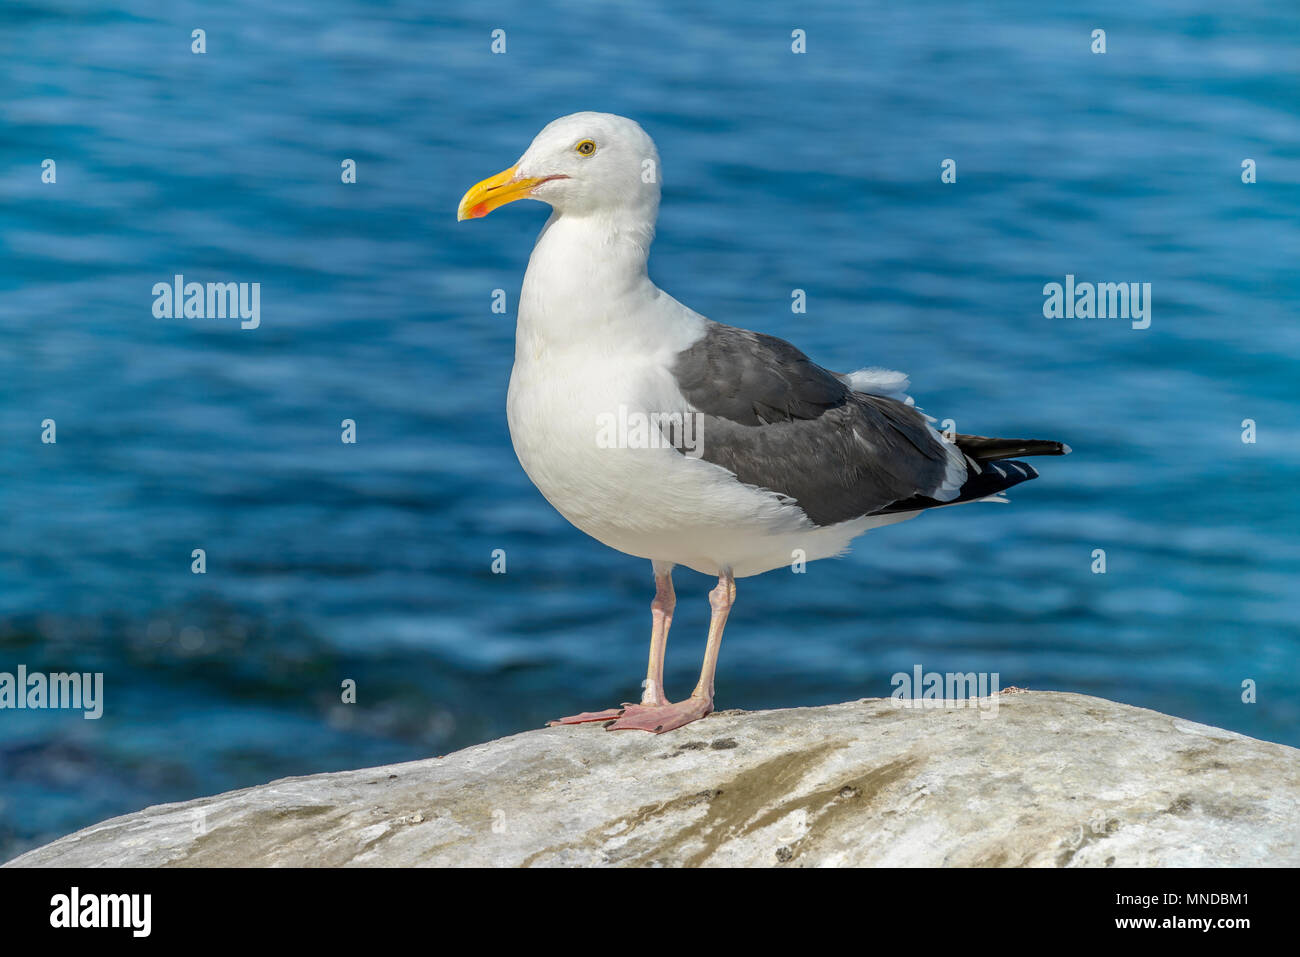 Standing Seagull - A close-up front side view of a seagull standing on a seaside rock. La Jolla Cove, San Diego, CA, USA. Stock Photo